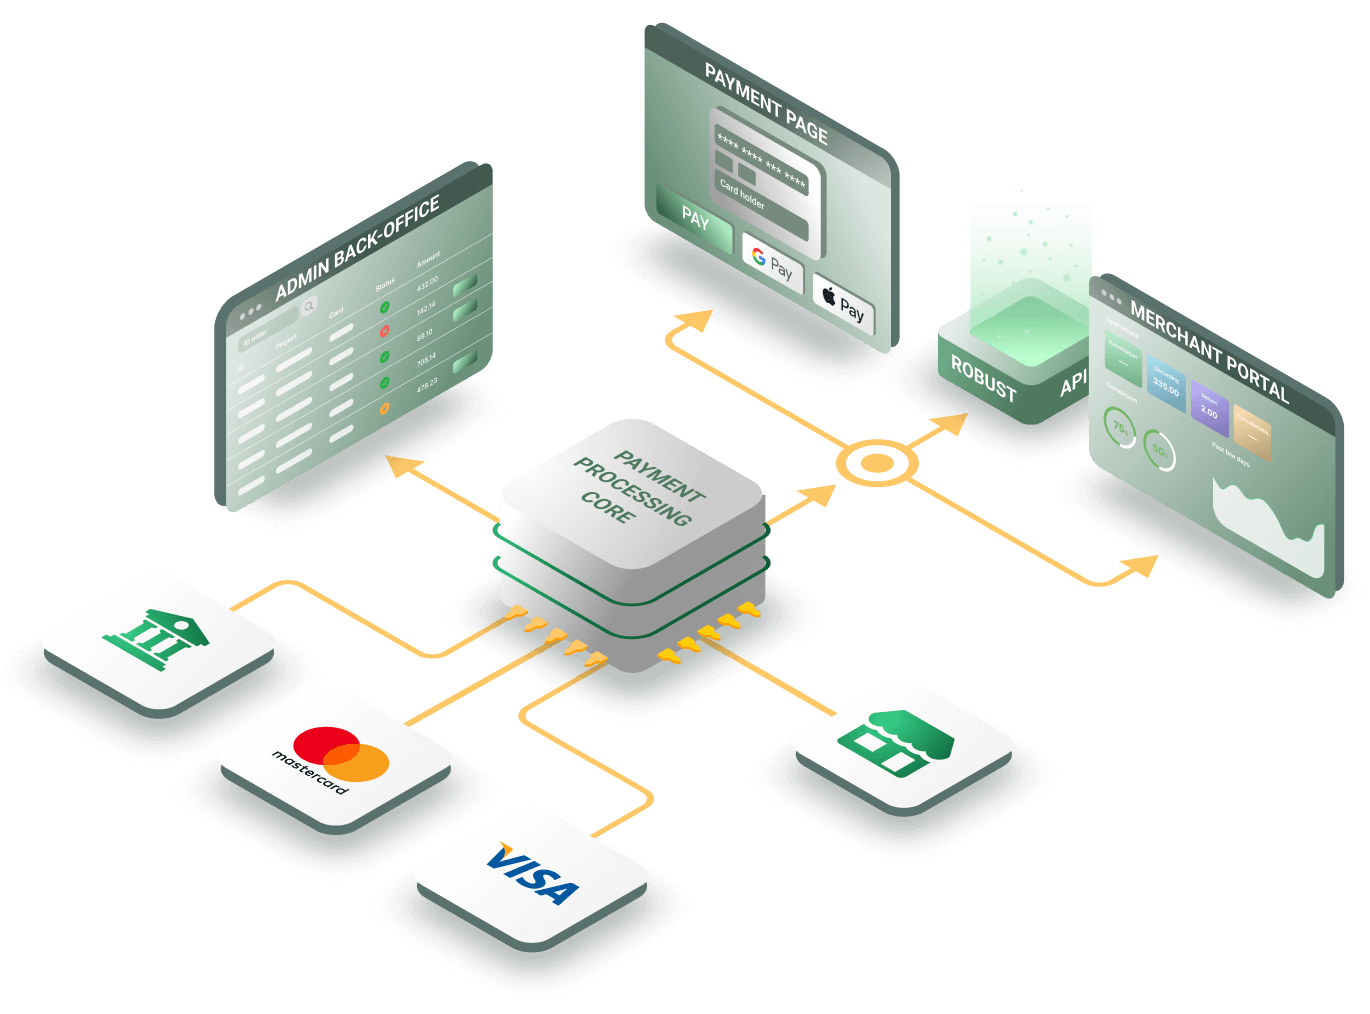 A white-label payment gateway to set up your own merchant acquiring service